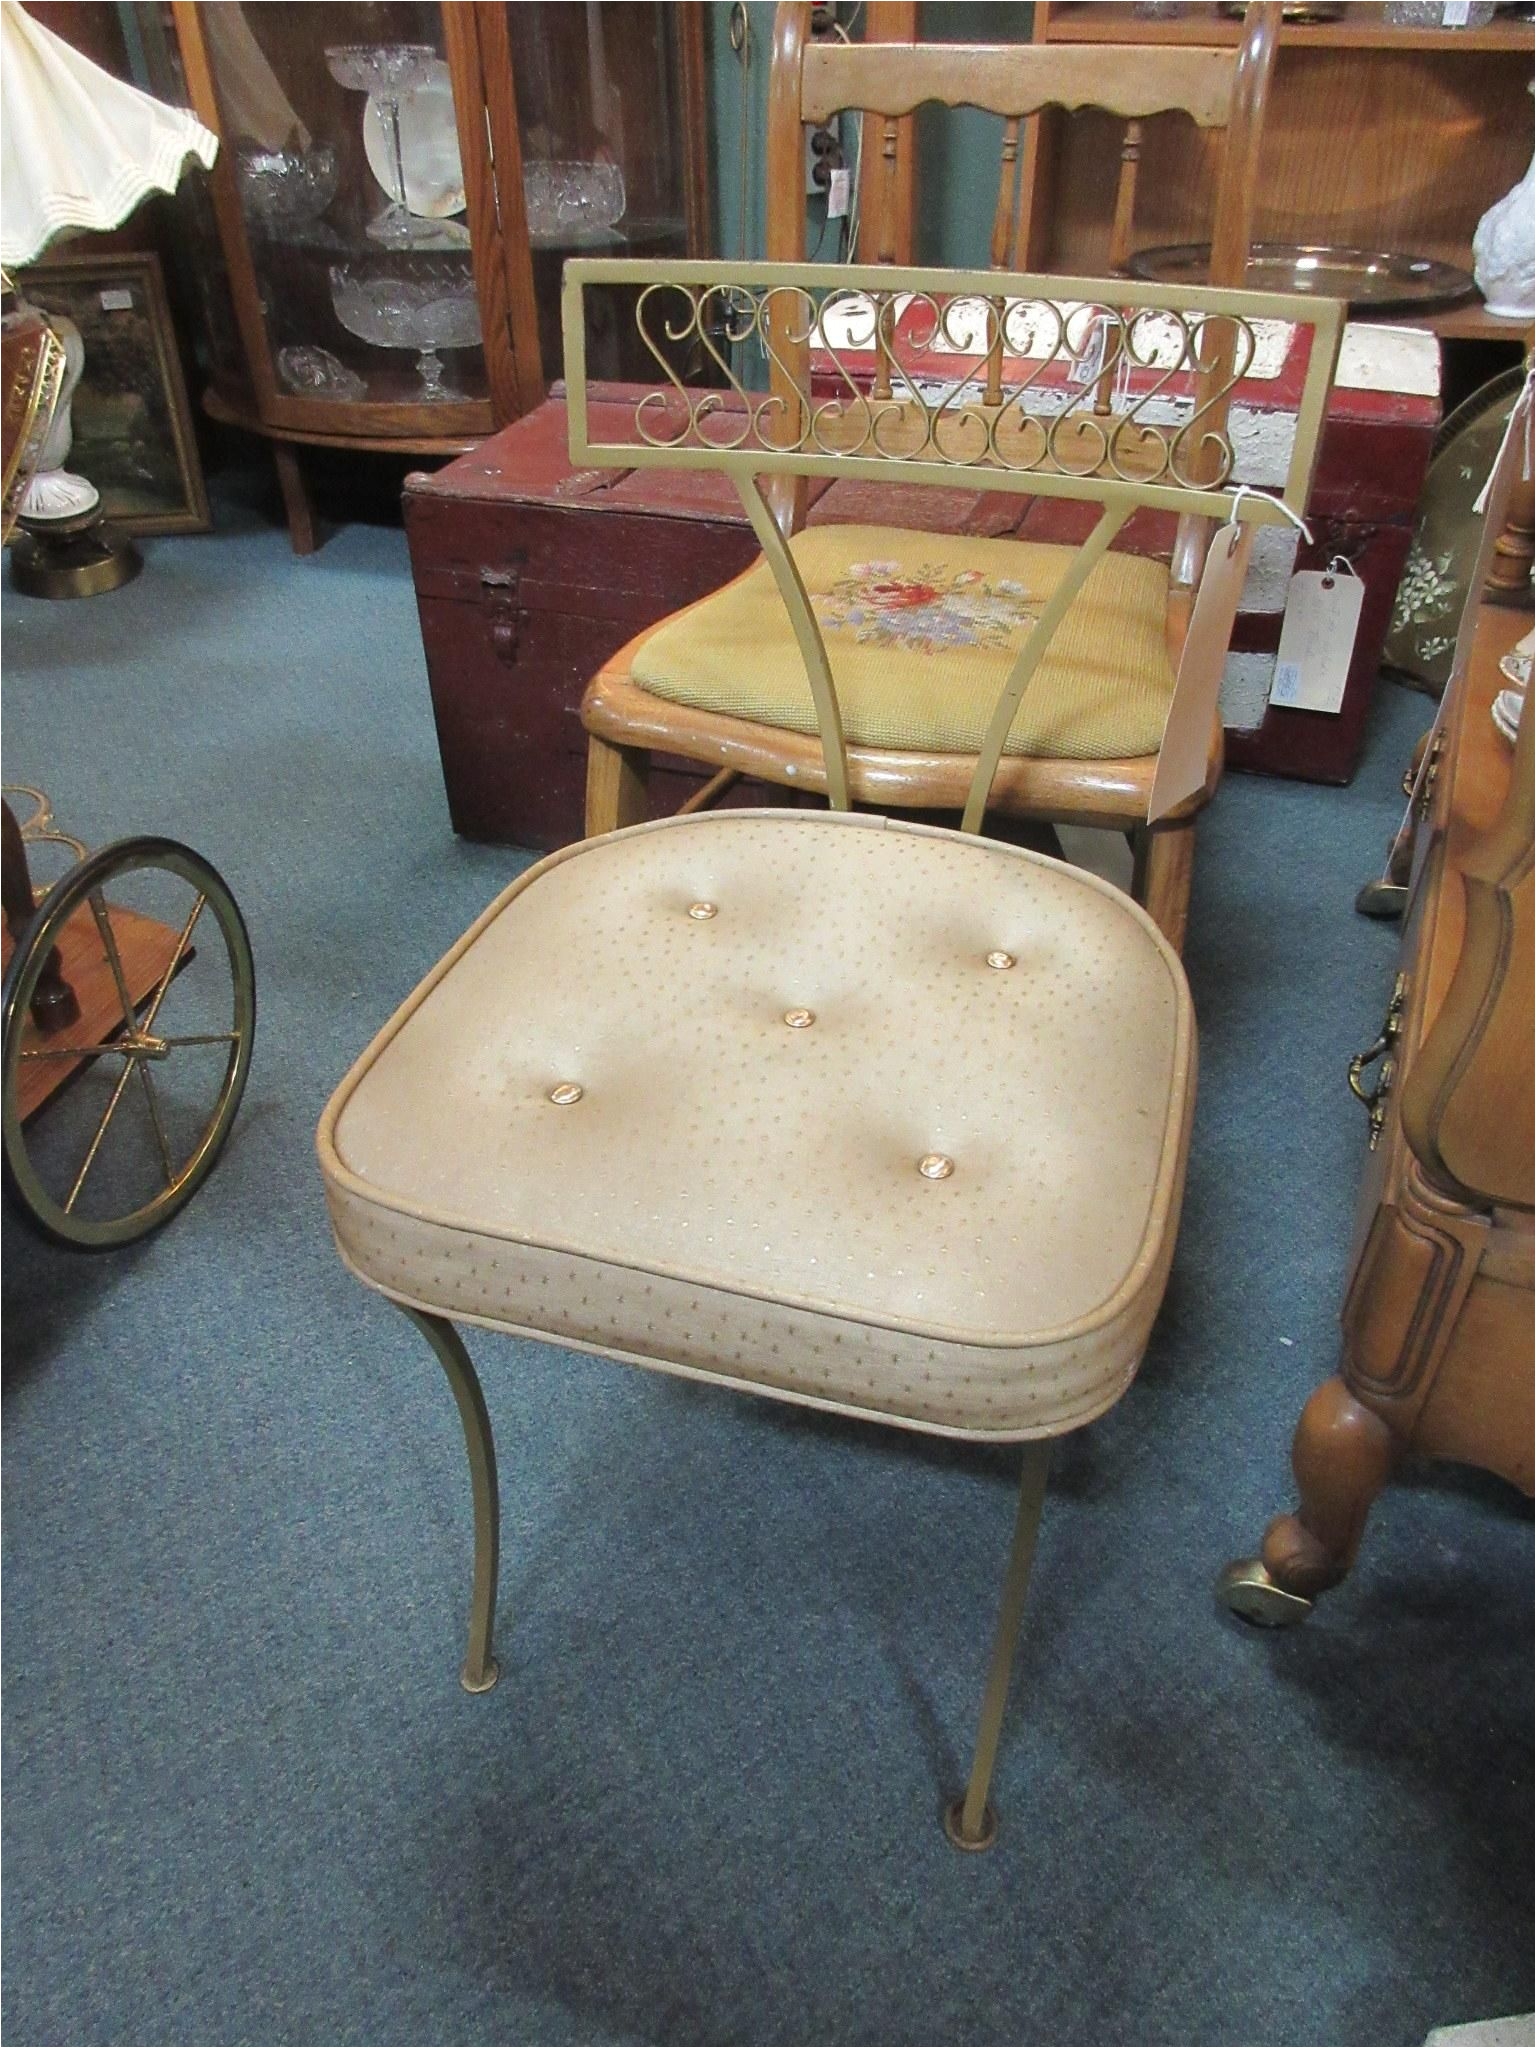 Antique Wooden Captains Chairs Vintage Vanity Chair From Vendor 192 Pricd at 59 00 the Brass